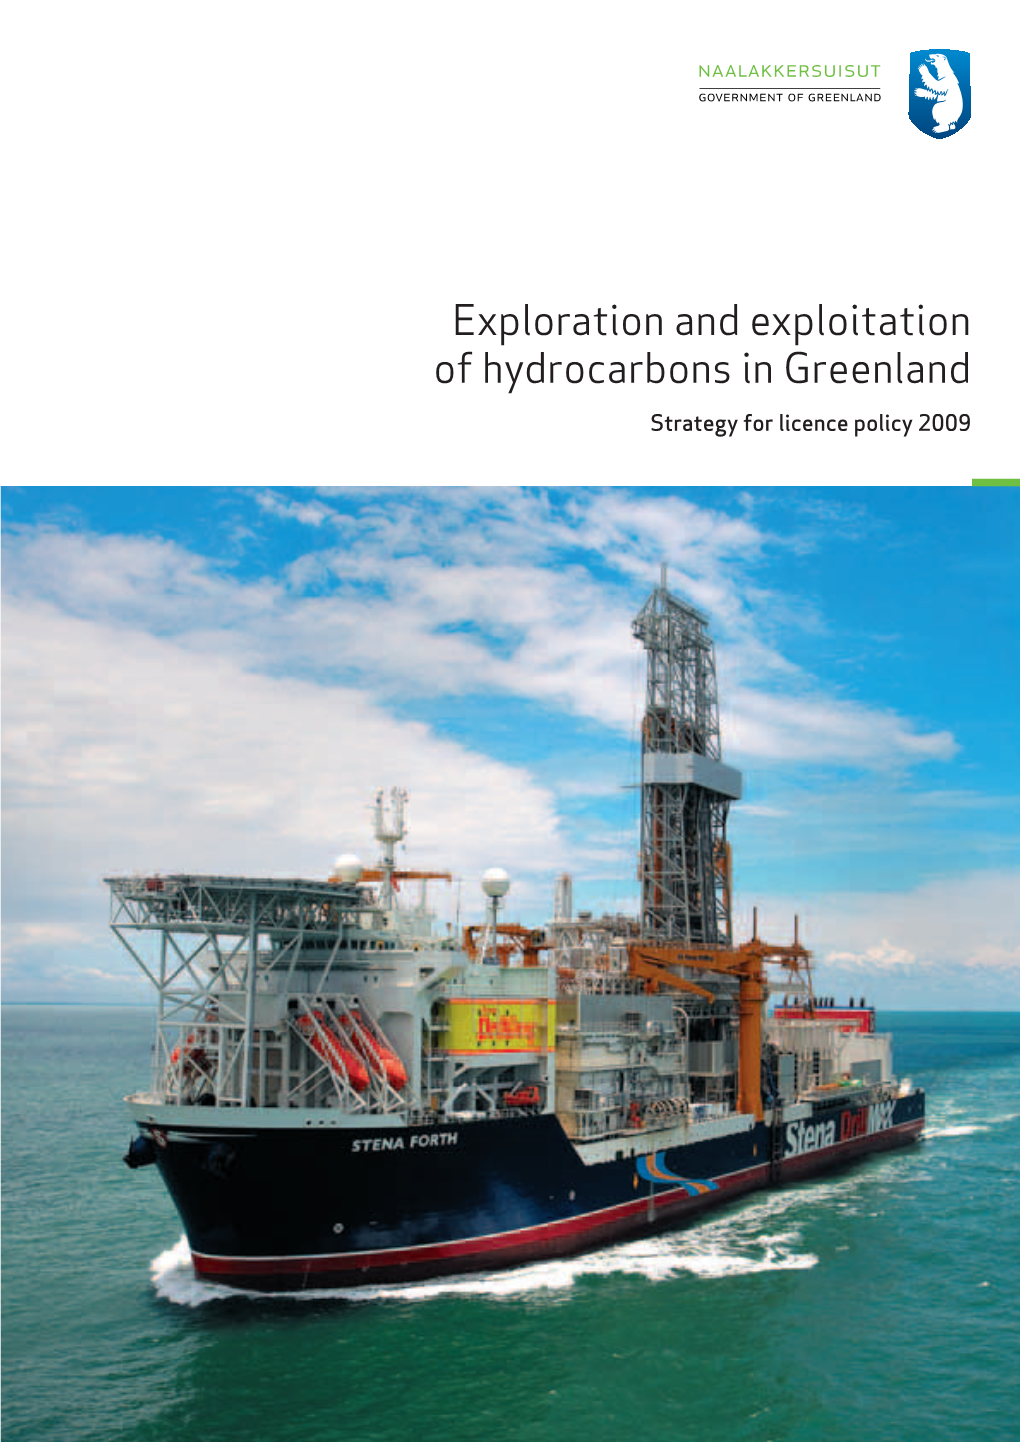 Exploration and Exploitation of Hydrocarbons in Greenland Strategy for Licence Policy 2009 Yrcrosrtg 2009 Hydrocarbonstrategy